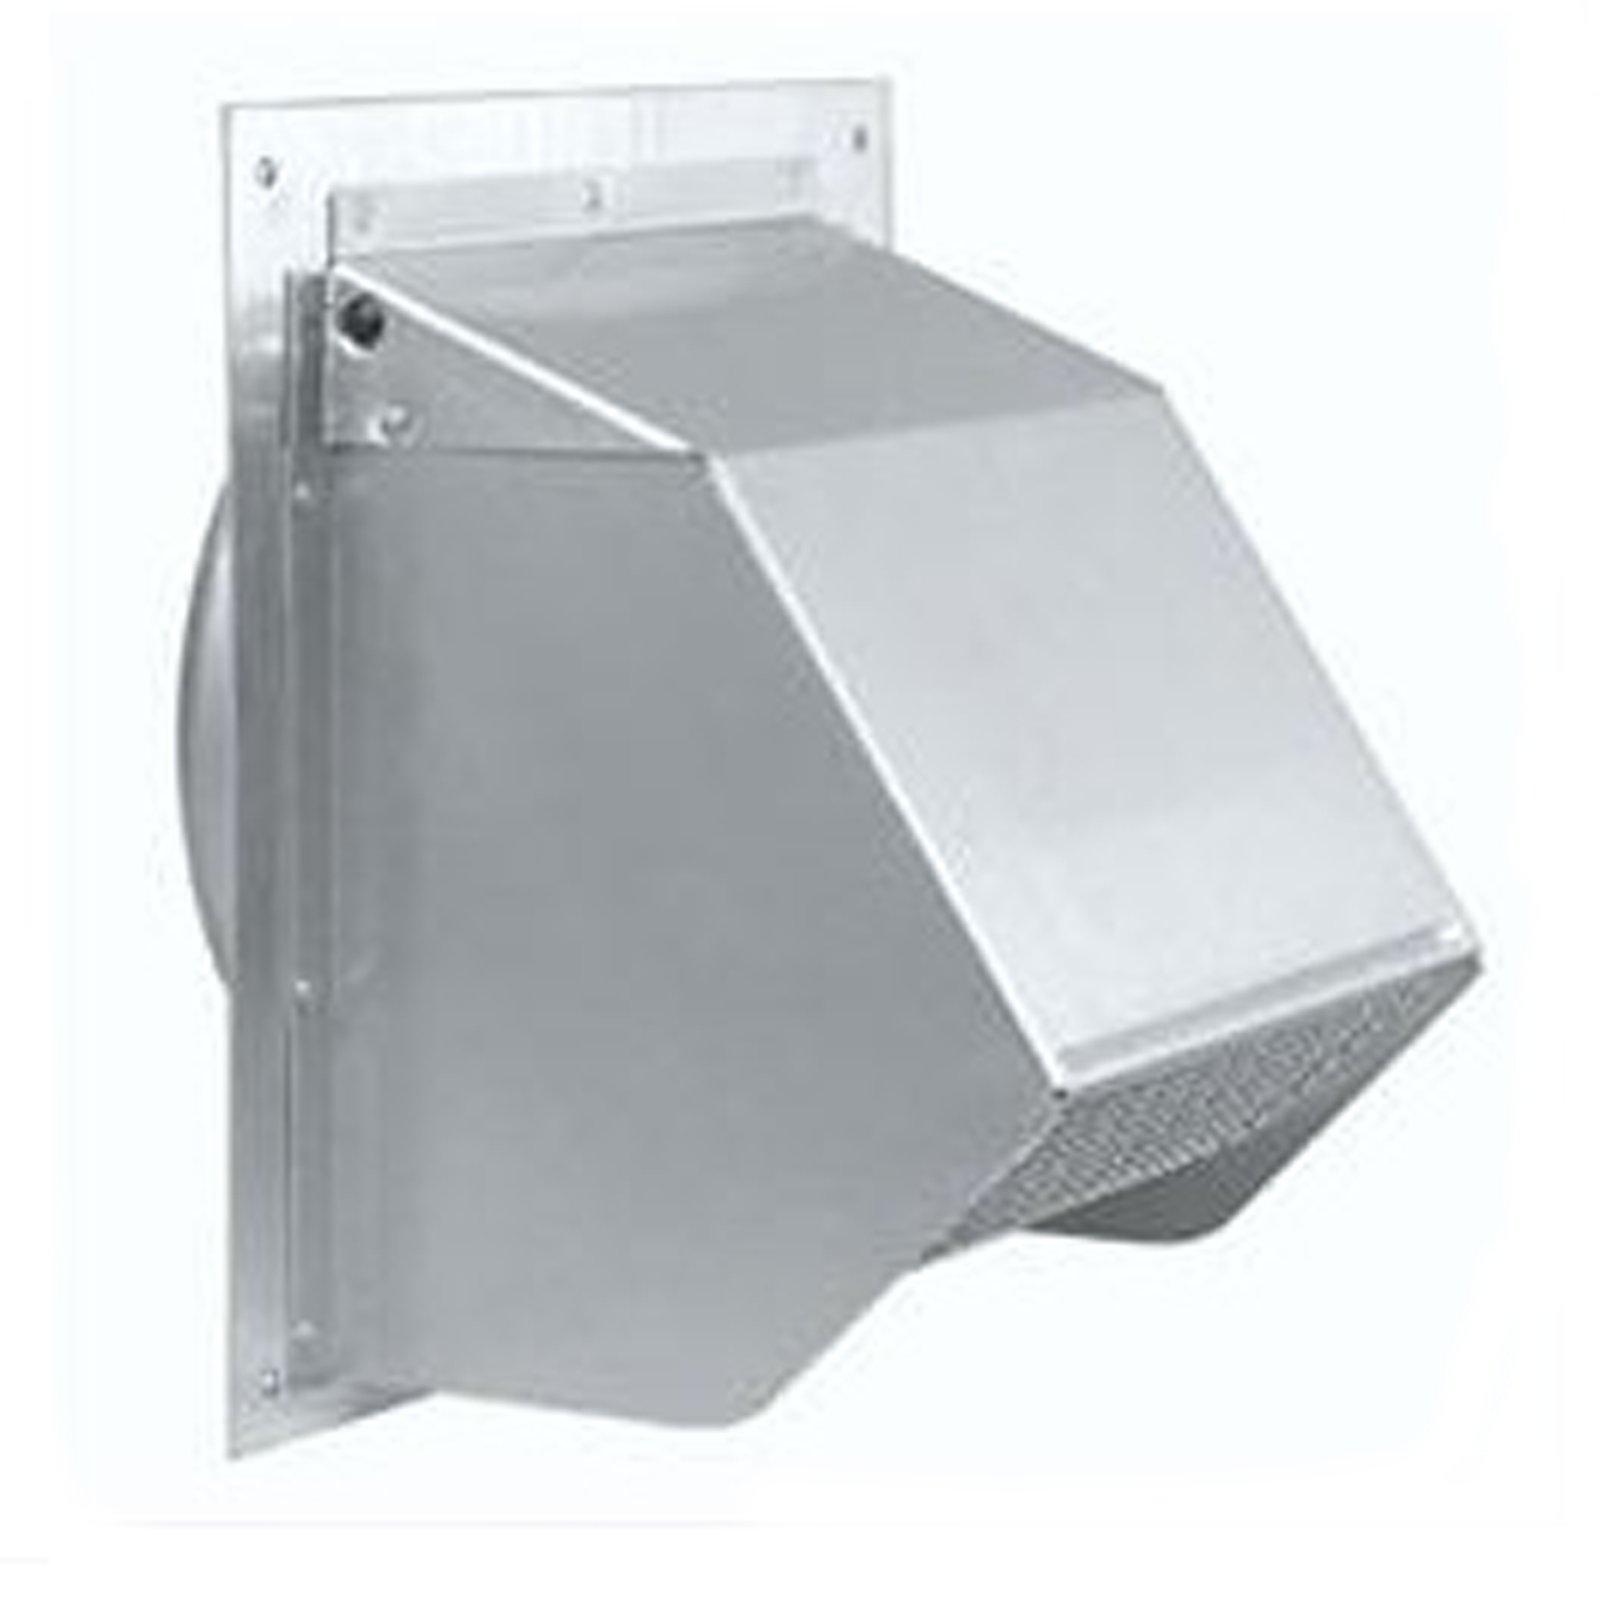 Broan 647 Wall Cap for 7" Round Duct for Range Hoods and Bath Ventilation Fans